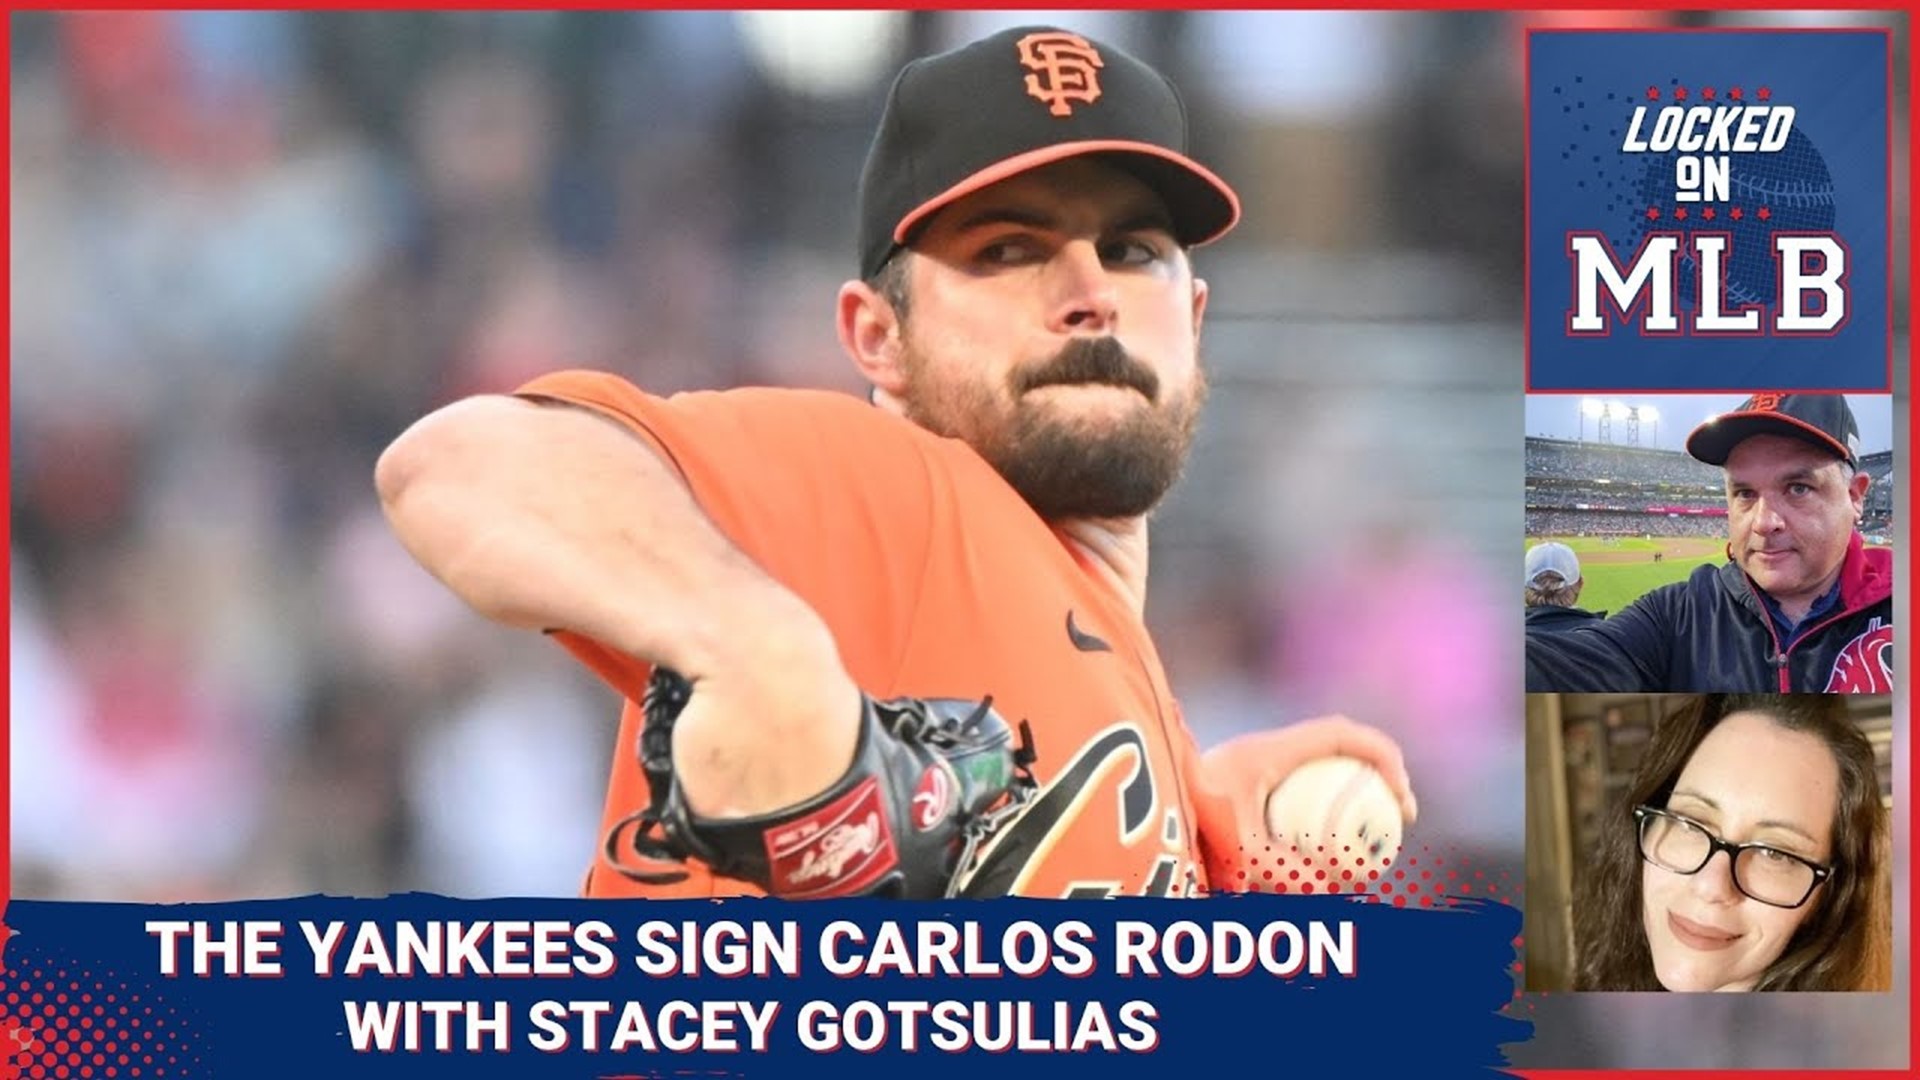 Locked on MLB - Carlos Rodon Signs with the Yankees. Featuring Stacey Gotsulias